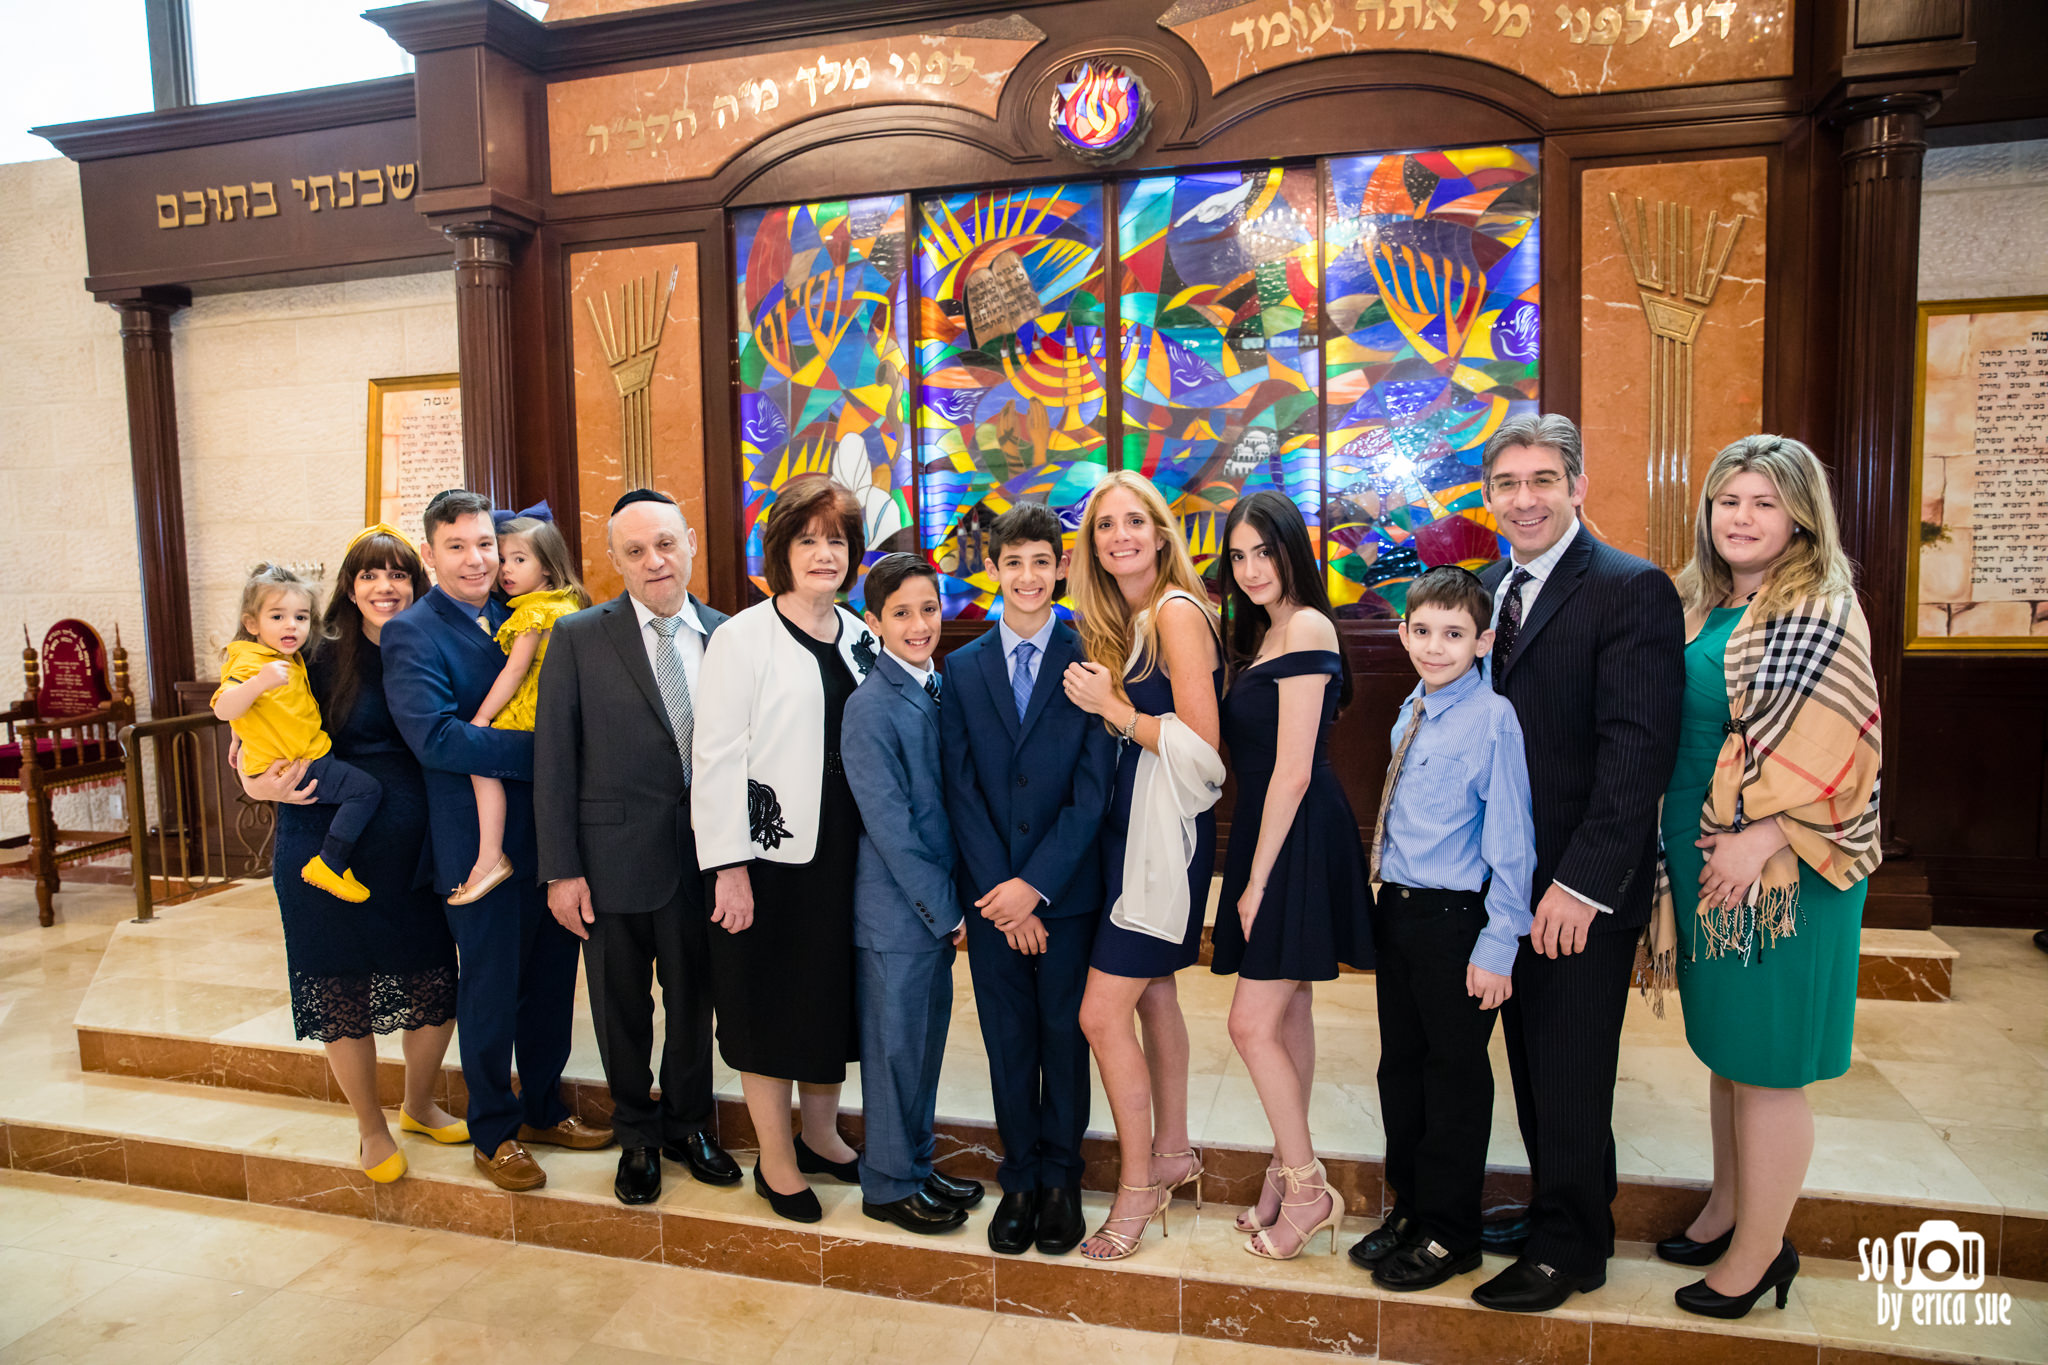 so-you-by-erica-sue-mitzvah-bnai-sephardim-hollywood-one-event-place-kosher-caterer-0367.jpg